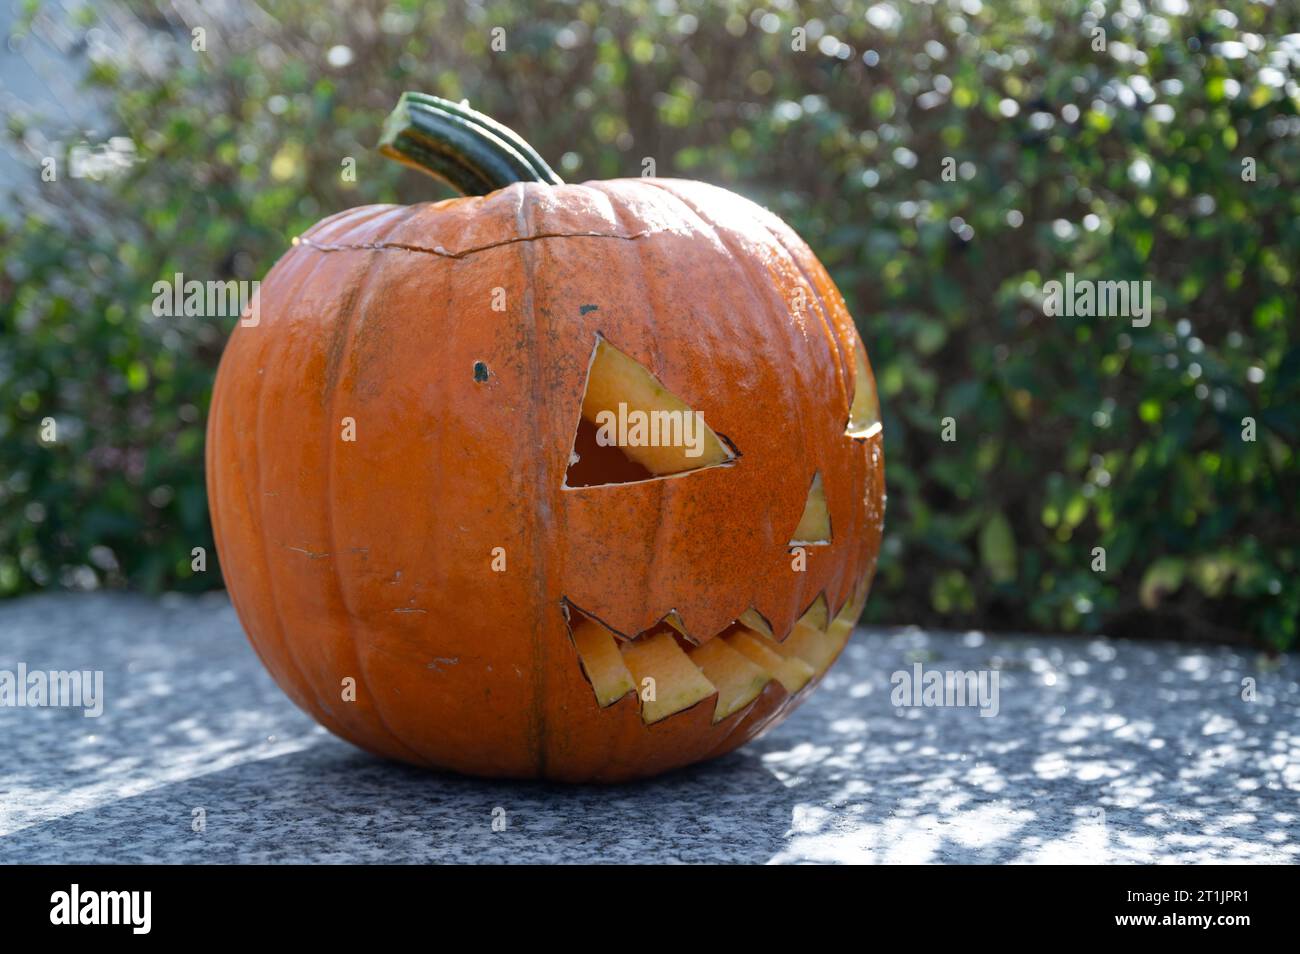 Self-carved pumpkin with aggressive and scary face as decoration for Halloween time Stock Photo